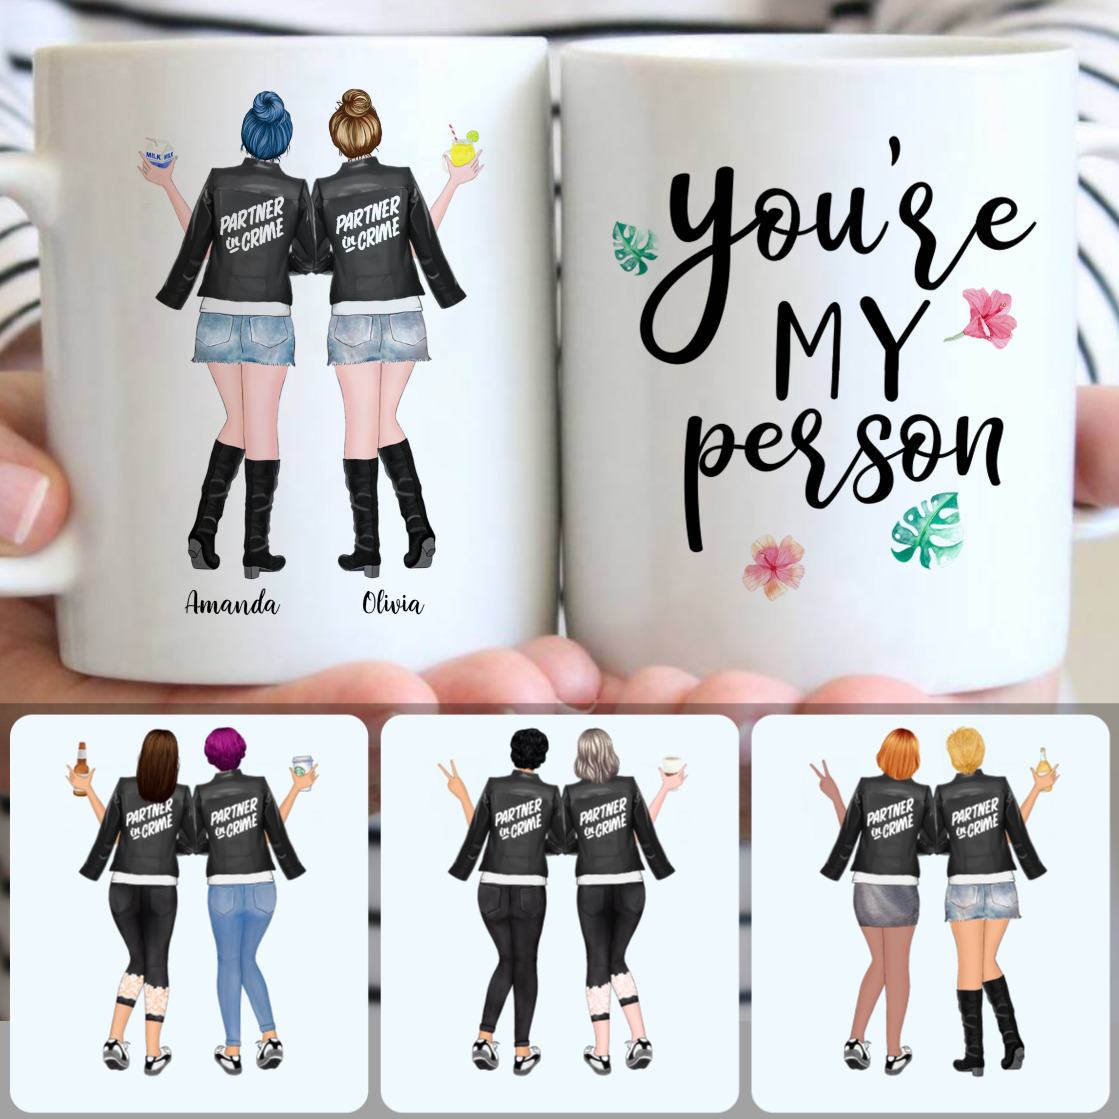 Personalized Mug, Perfect Birthday Gifts, 2 Sisters - Partner In Crime Customized Coffee Mug With Names